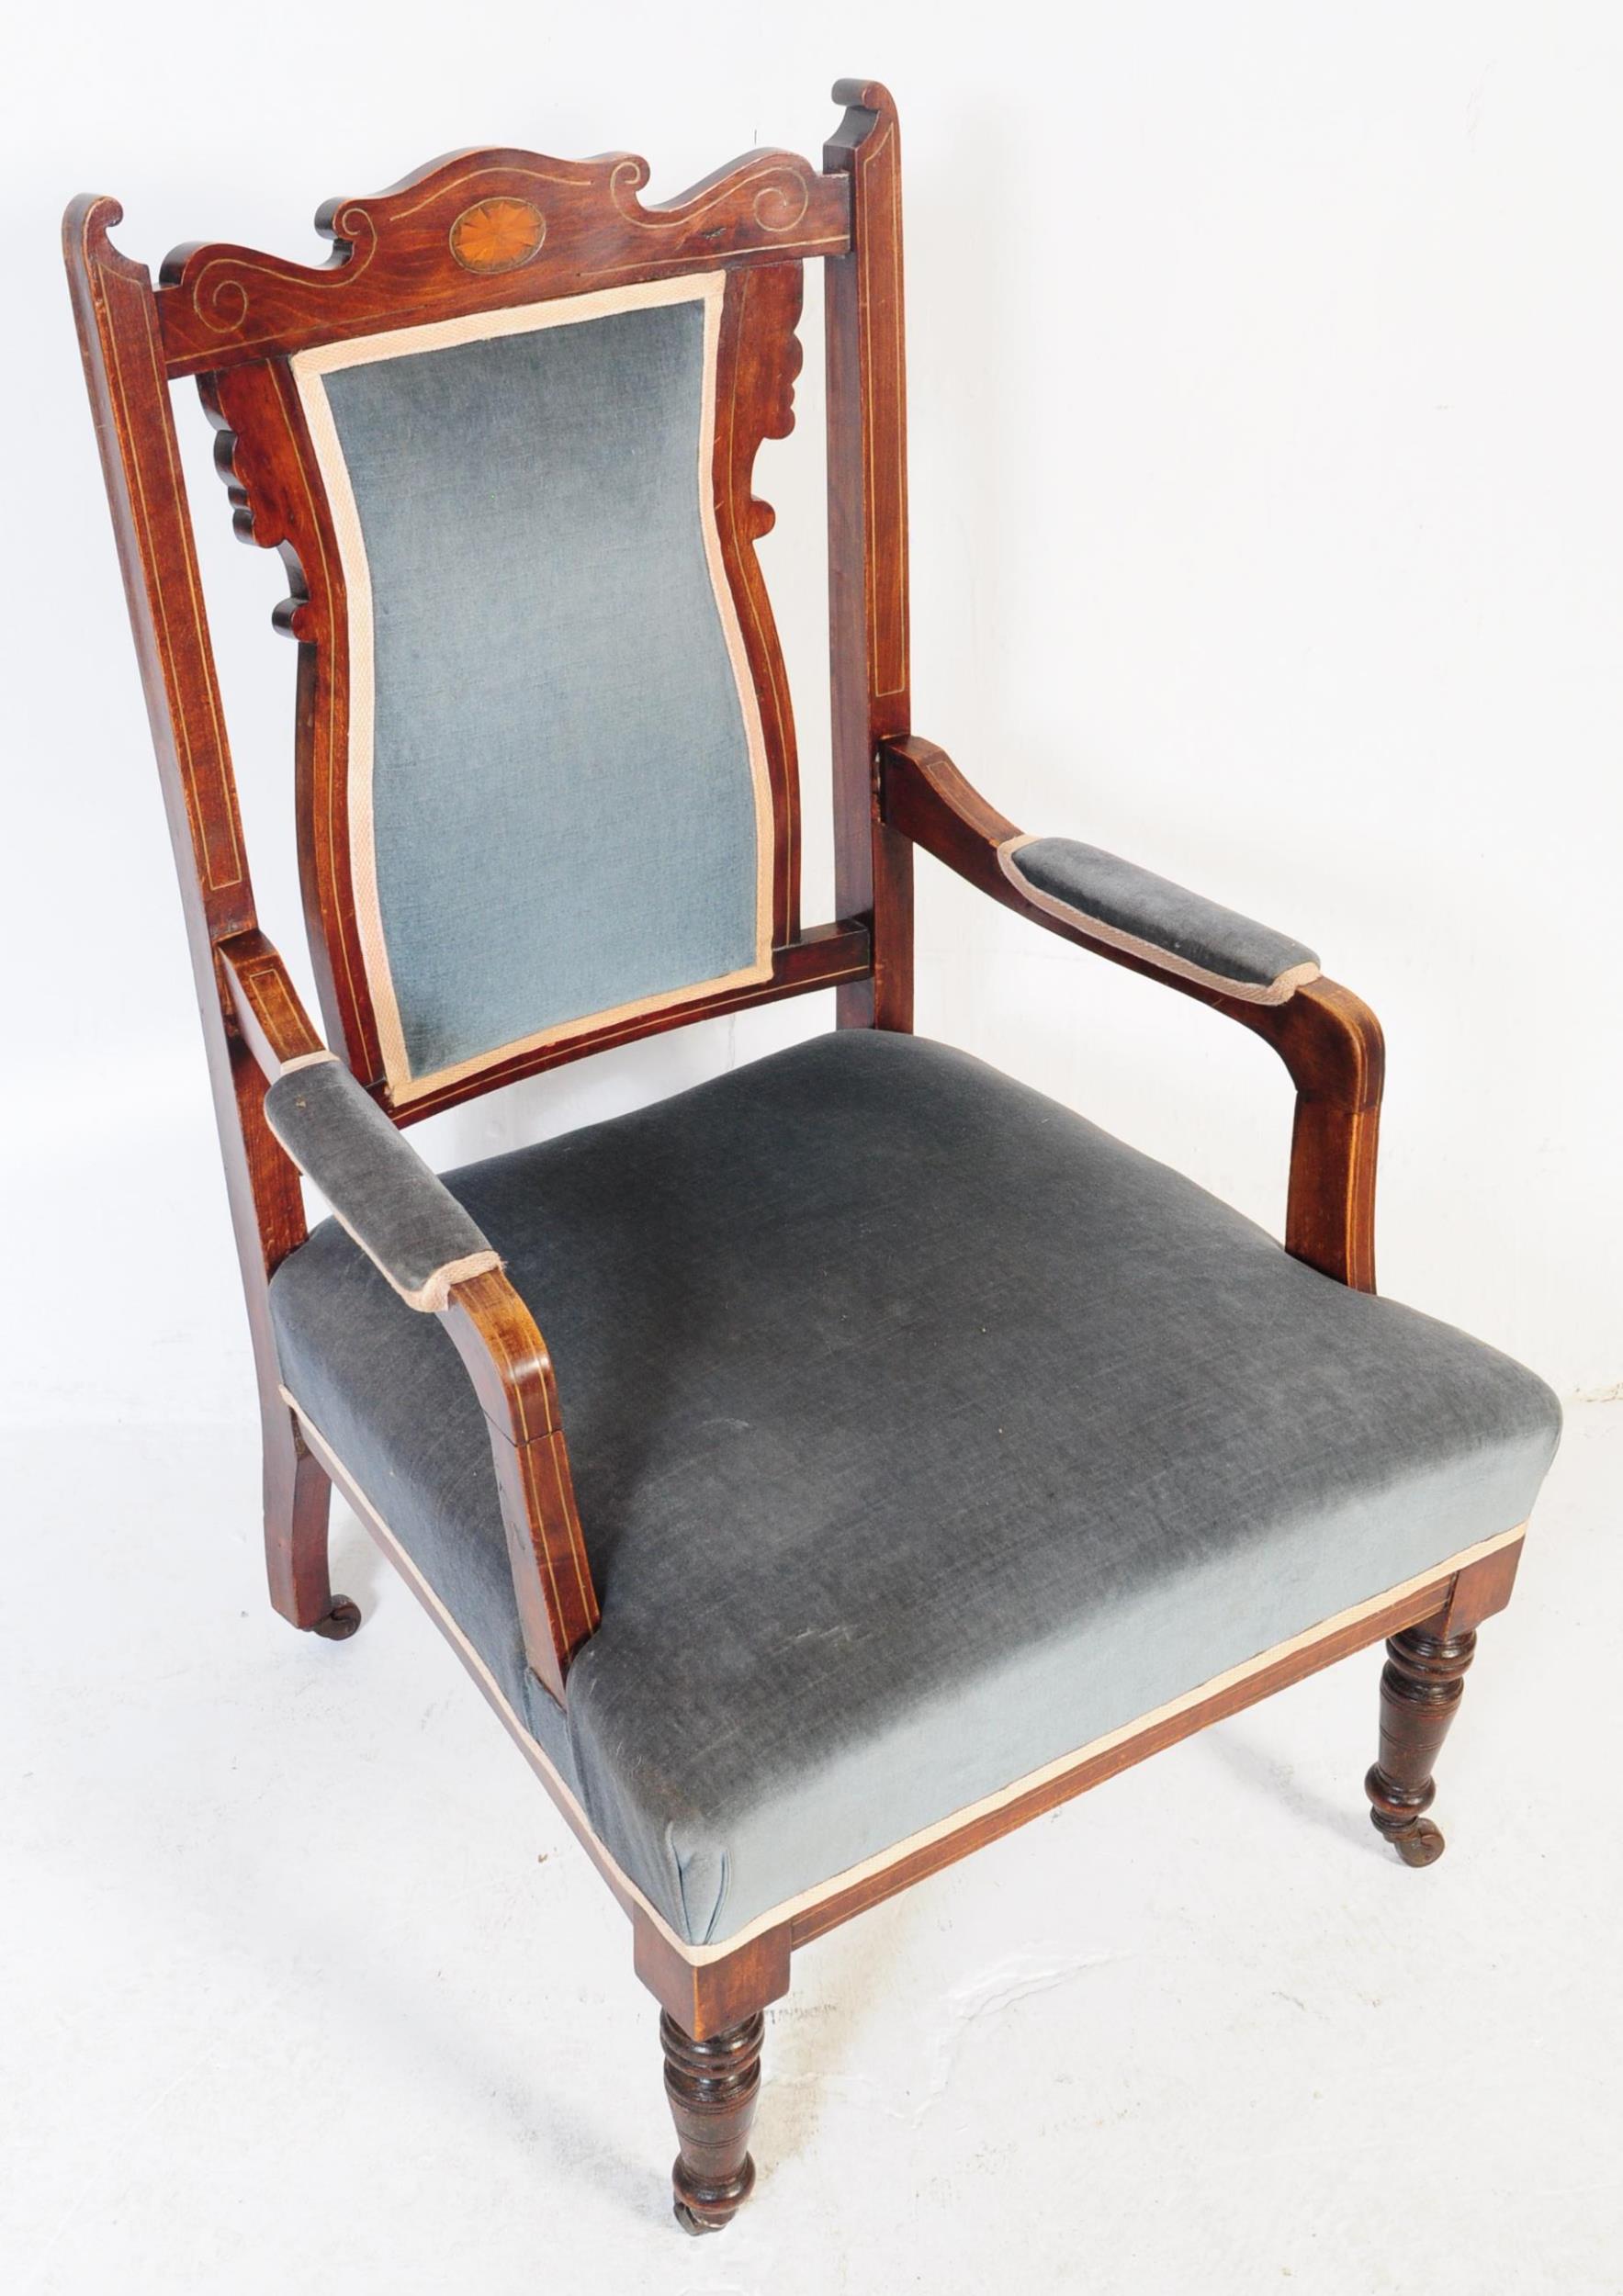 PAIR OF 19TH CENTURY VICTORIAN MAHOGANY ARMCHAIRS - Image 4 of 8